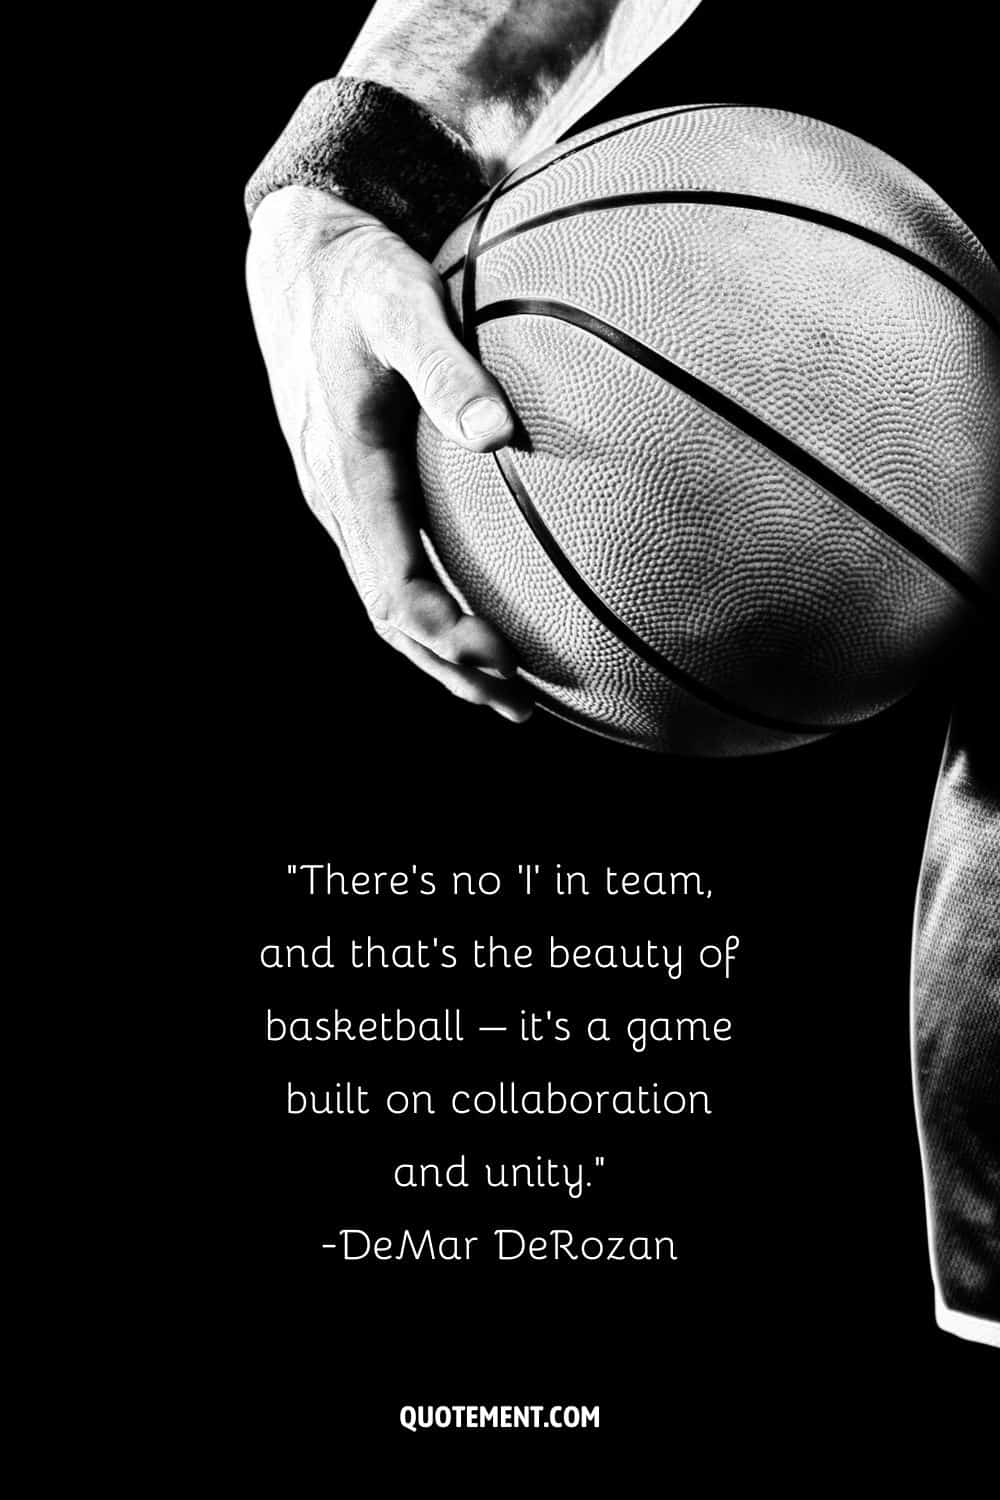 There's no 'I' in team, and that's the beauty of basketball – it's a game built on collaboration and unity